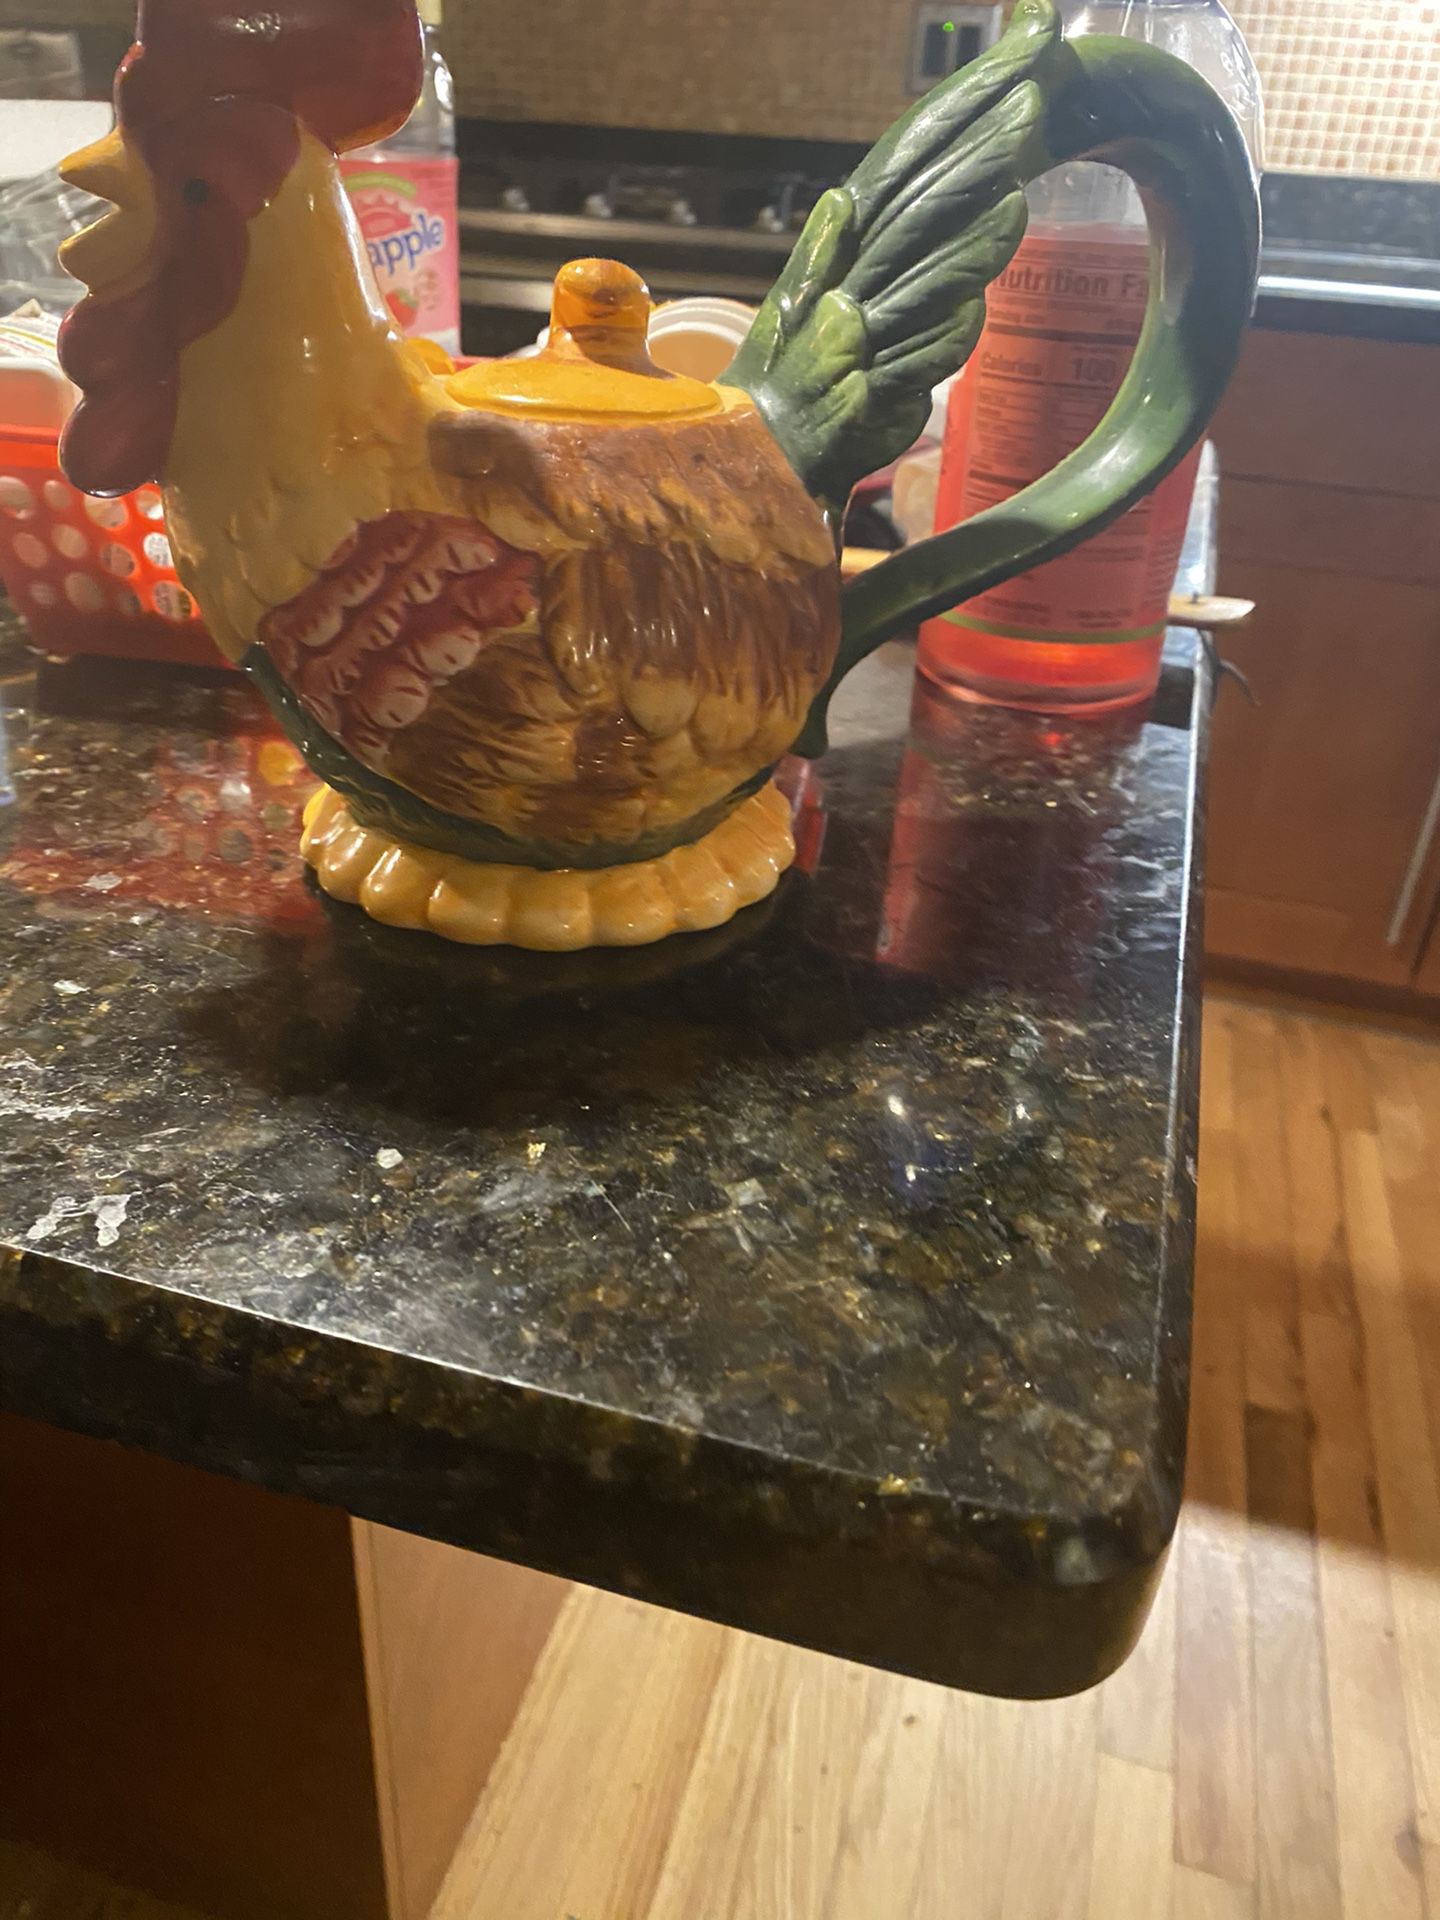 Aicok Electronic Glass Kettle for Sale in Superior, MT - OfferUp